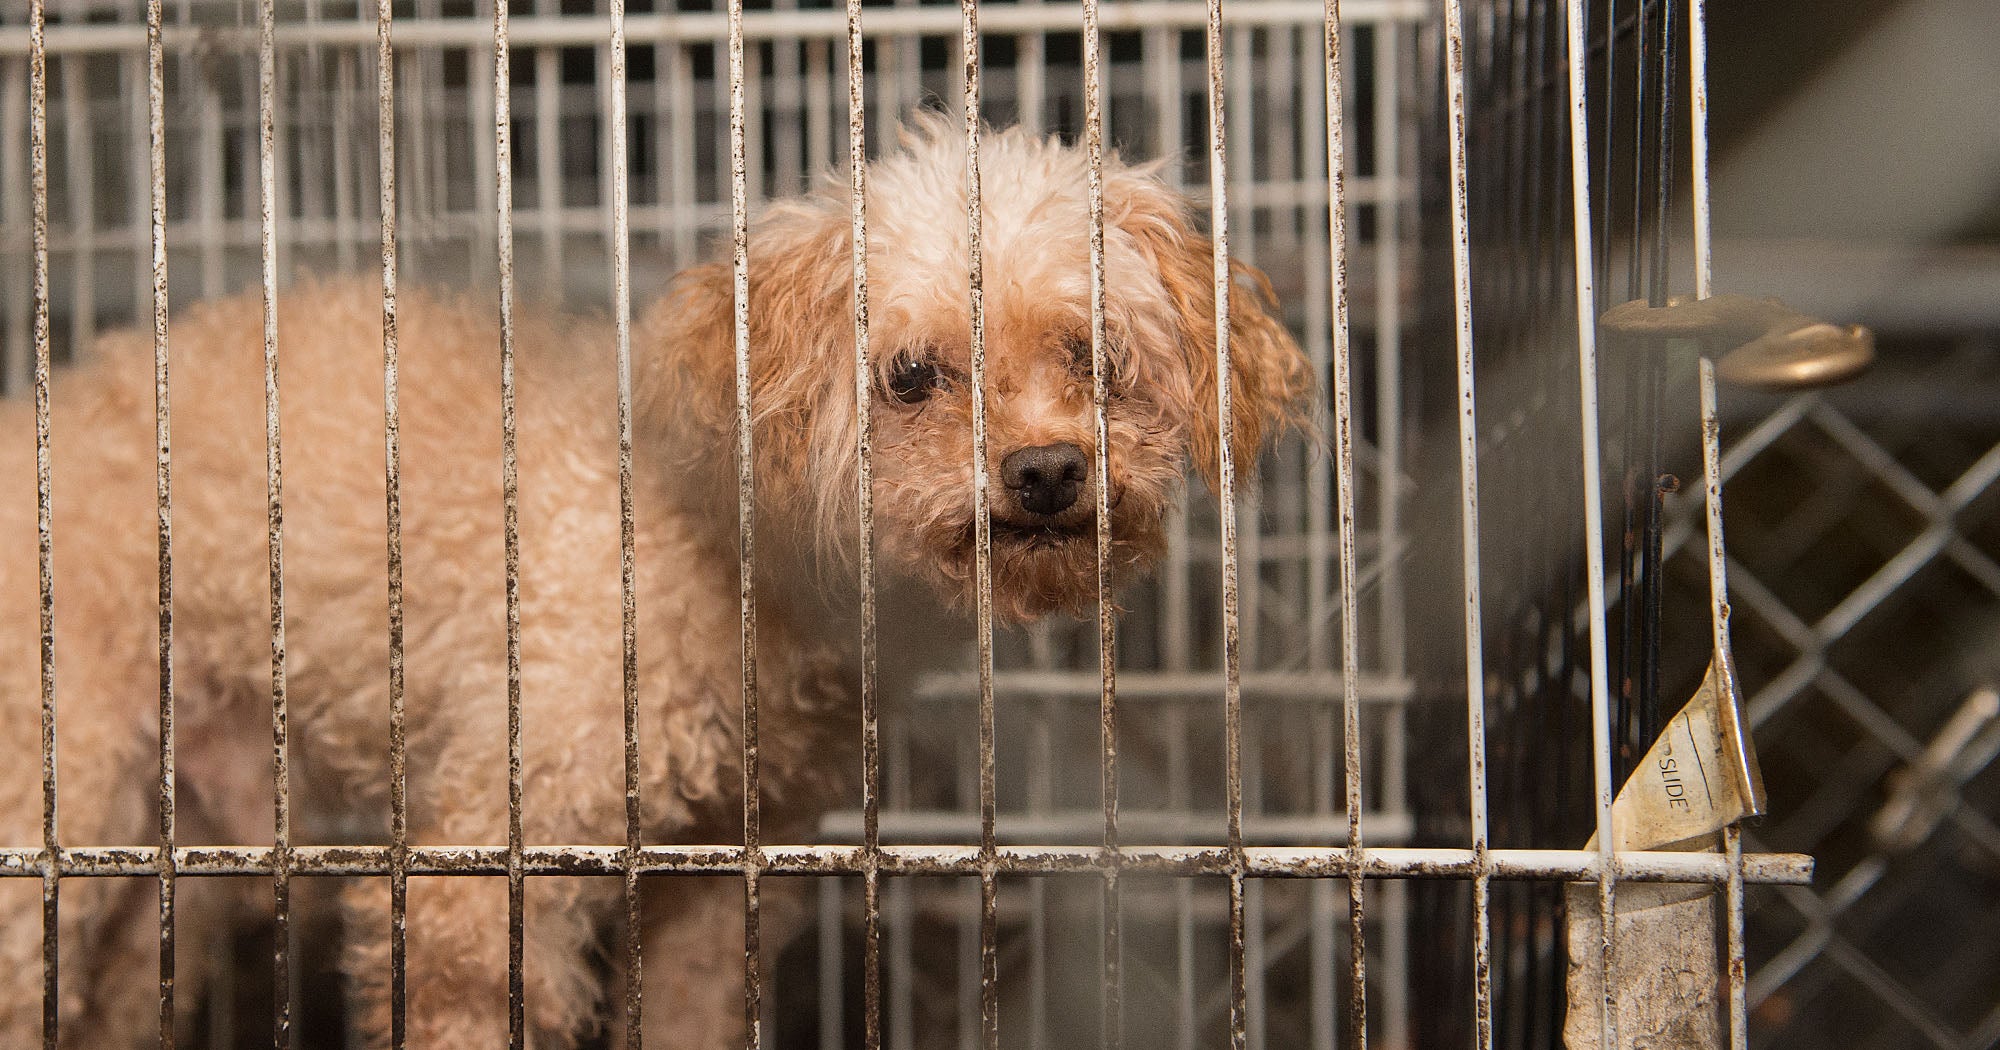 Puppy mills FAQ | The Humane Society of the United States